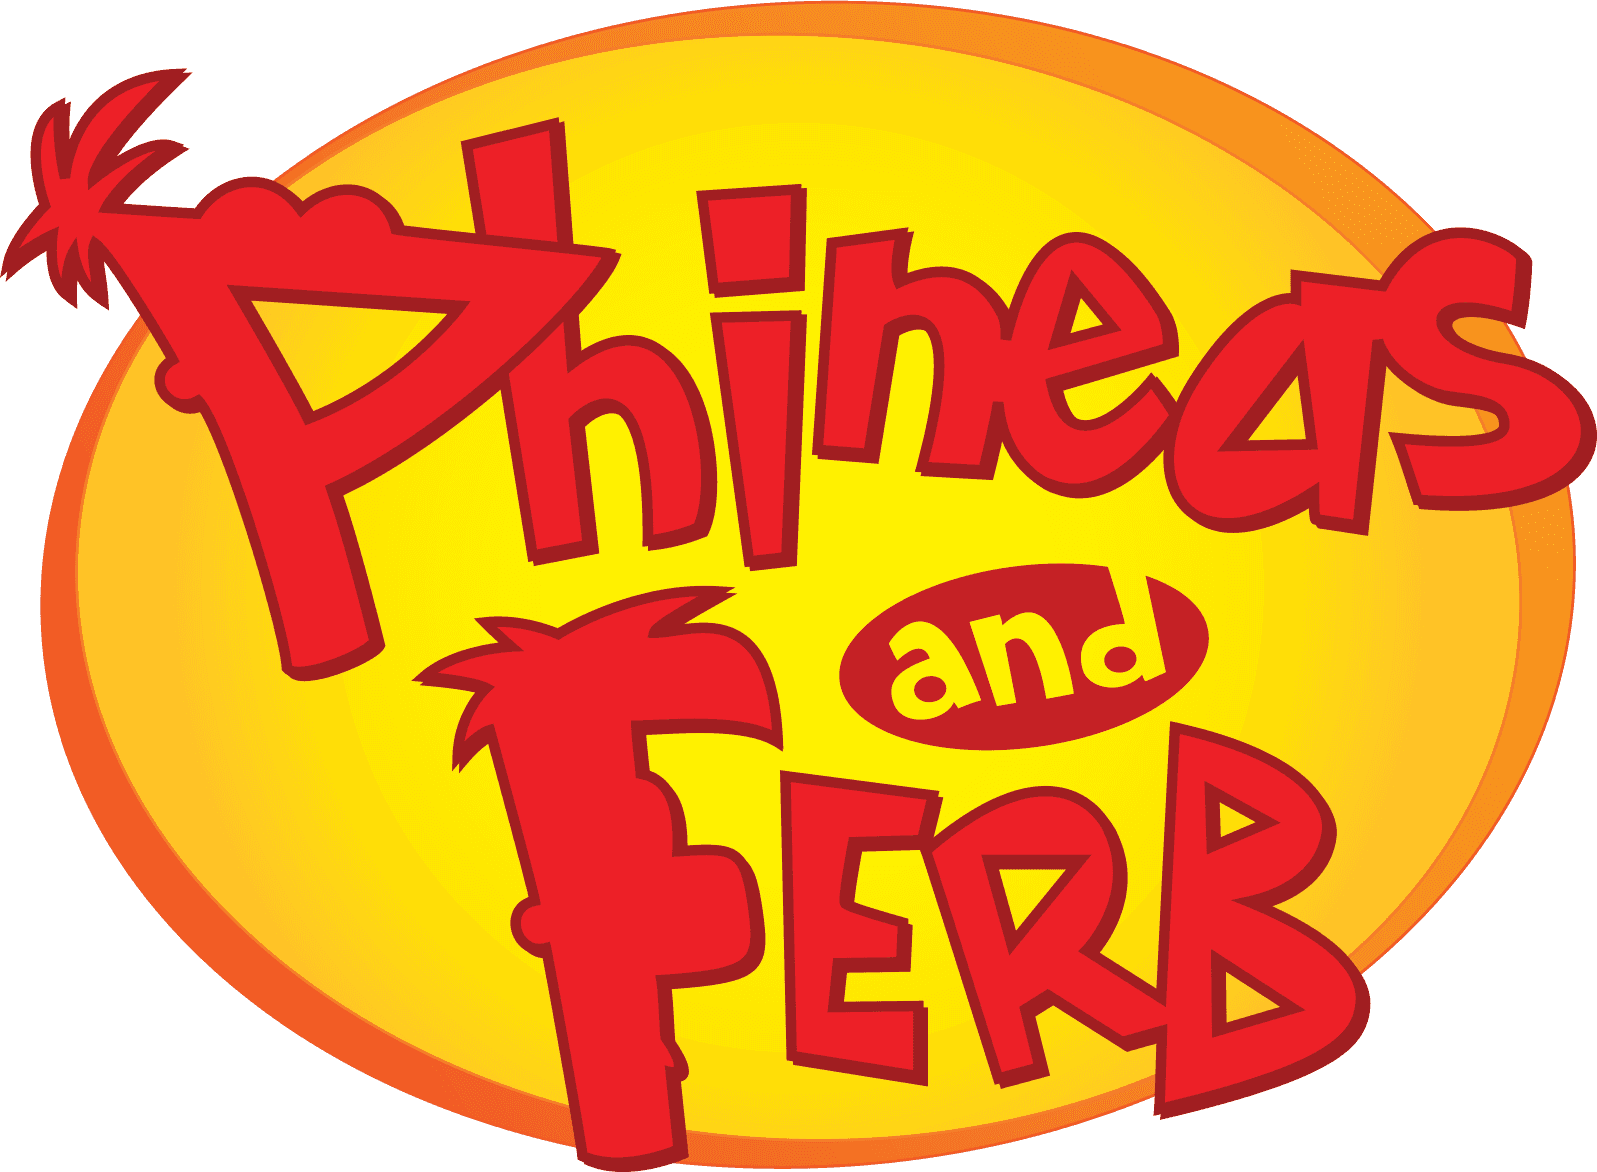 Phineas and Ferb logo